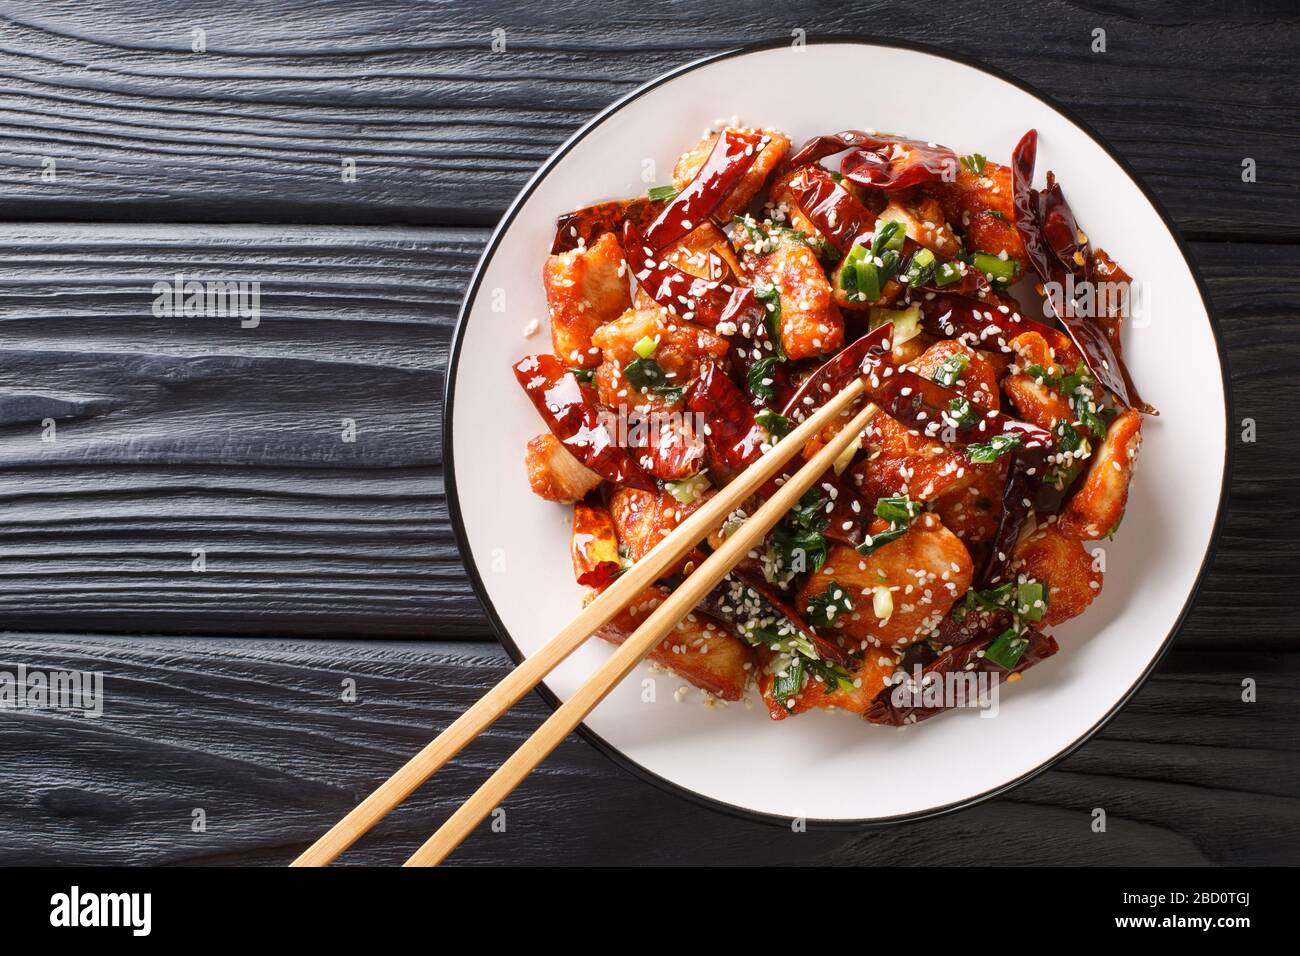 https://c8.alamy.com/comp/2BD0TGJ/chinese-mala-chicken-with-lots-of-sichuan-pepper-closeup-in-a-plate-on-the-table-horizontal-top-view-from-above-2BD0TGJ.jpg